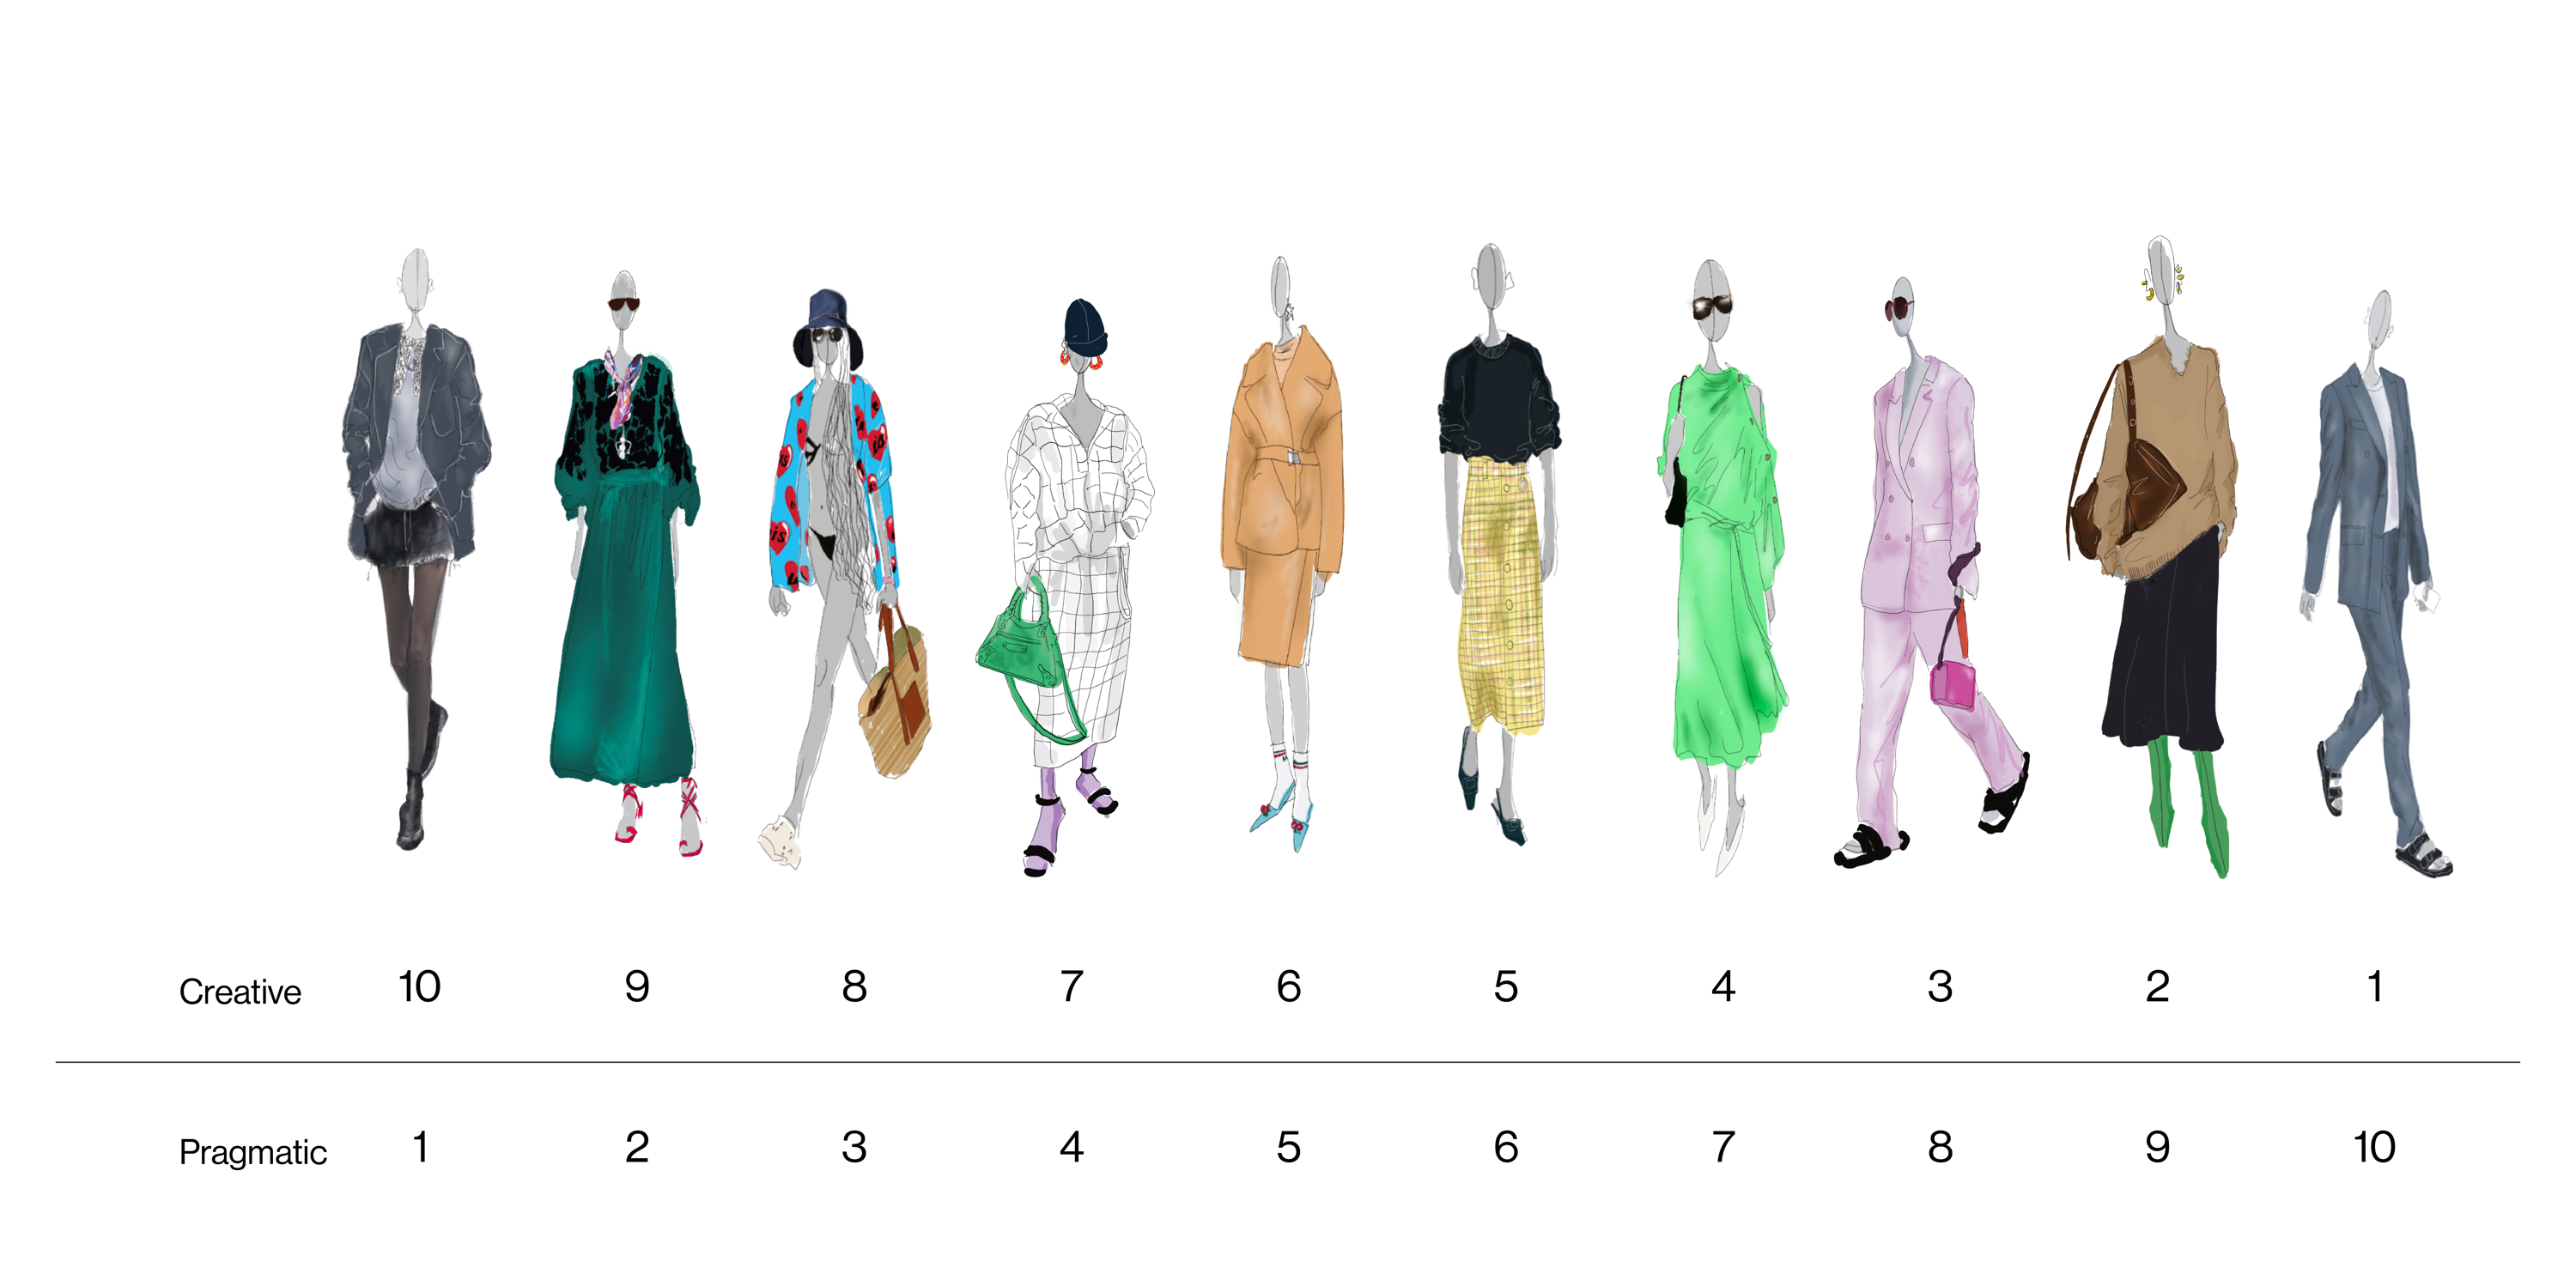 ten illustrated women above a scale of creative vs pragmatic with numbers ranging from 1 to 10